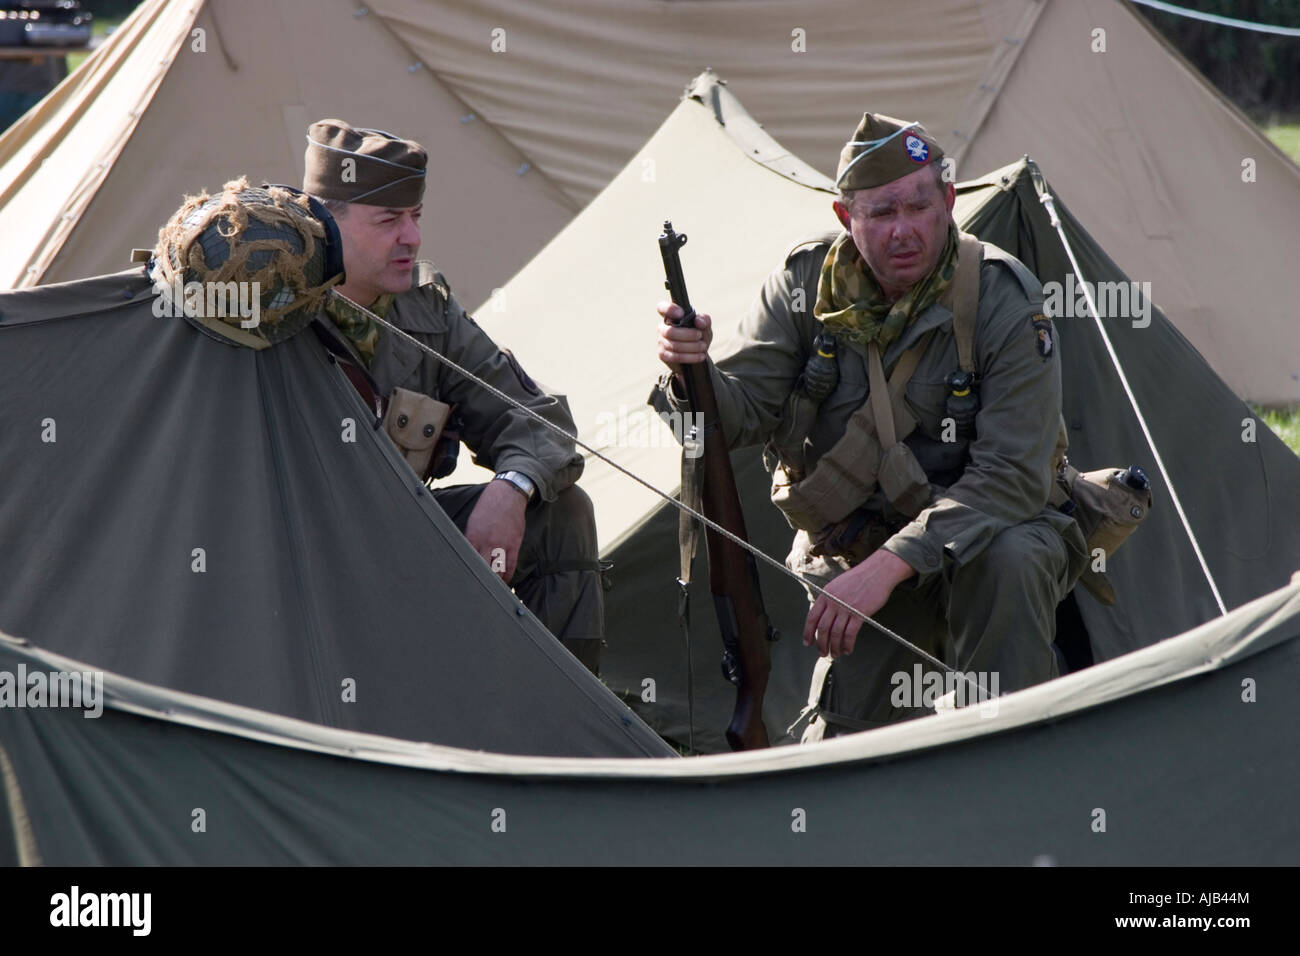 Soldiers camped out in WWII re enactment Stock Photo